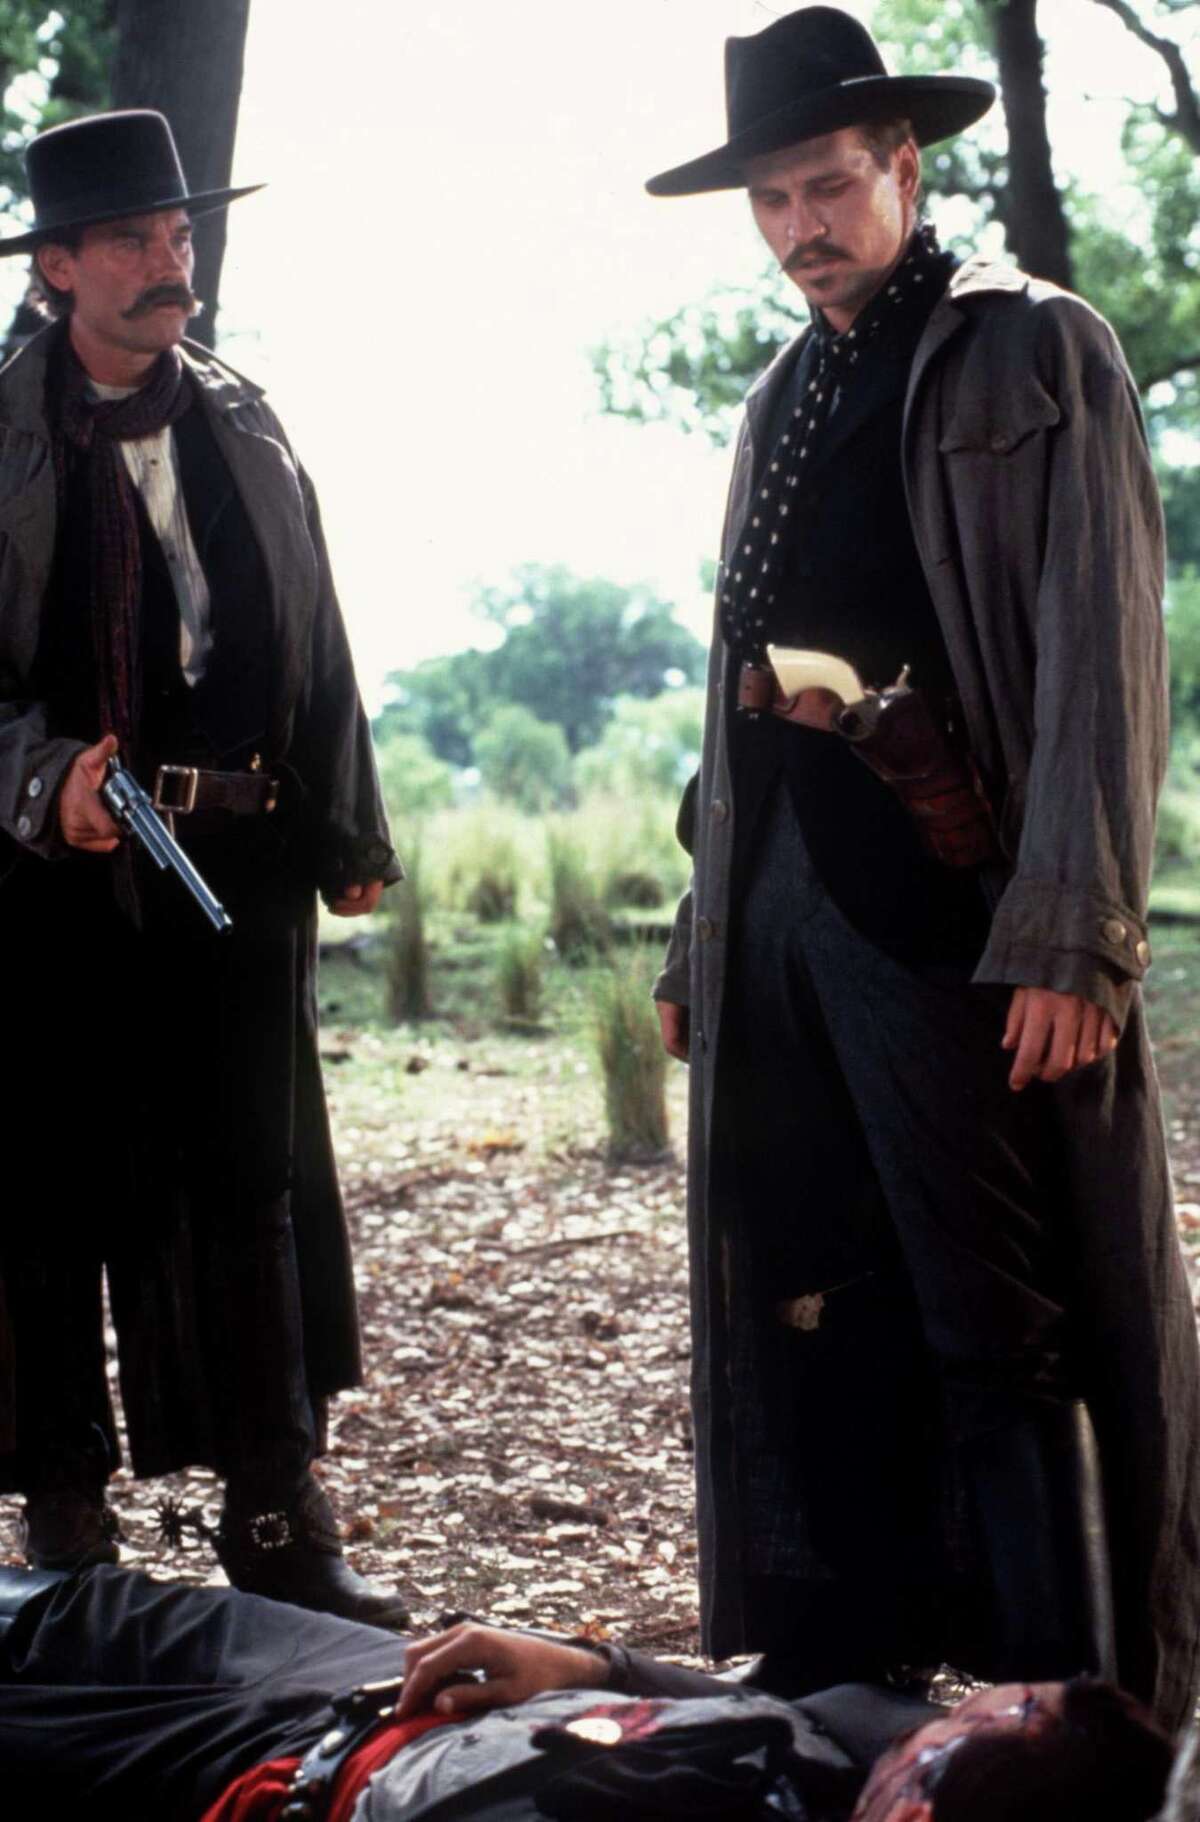 Kurt Russell, left, and Val Kilmer star in “Tombstone.”